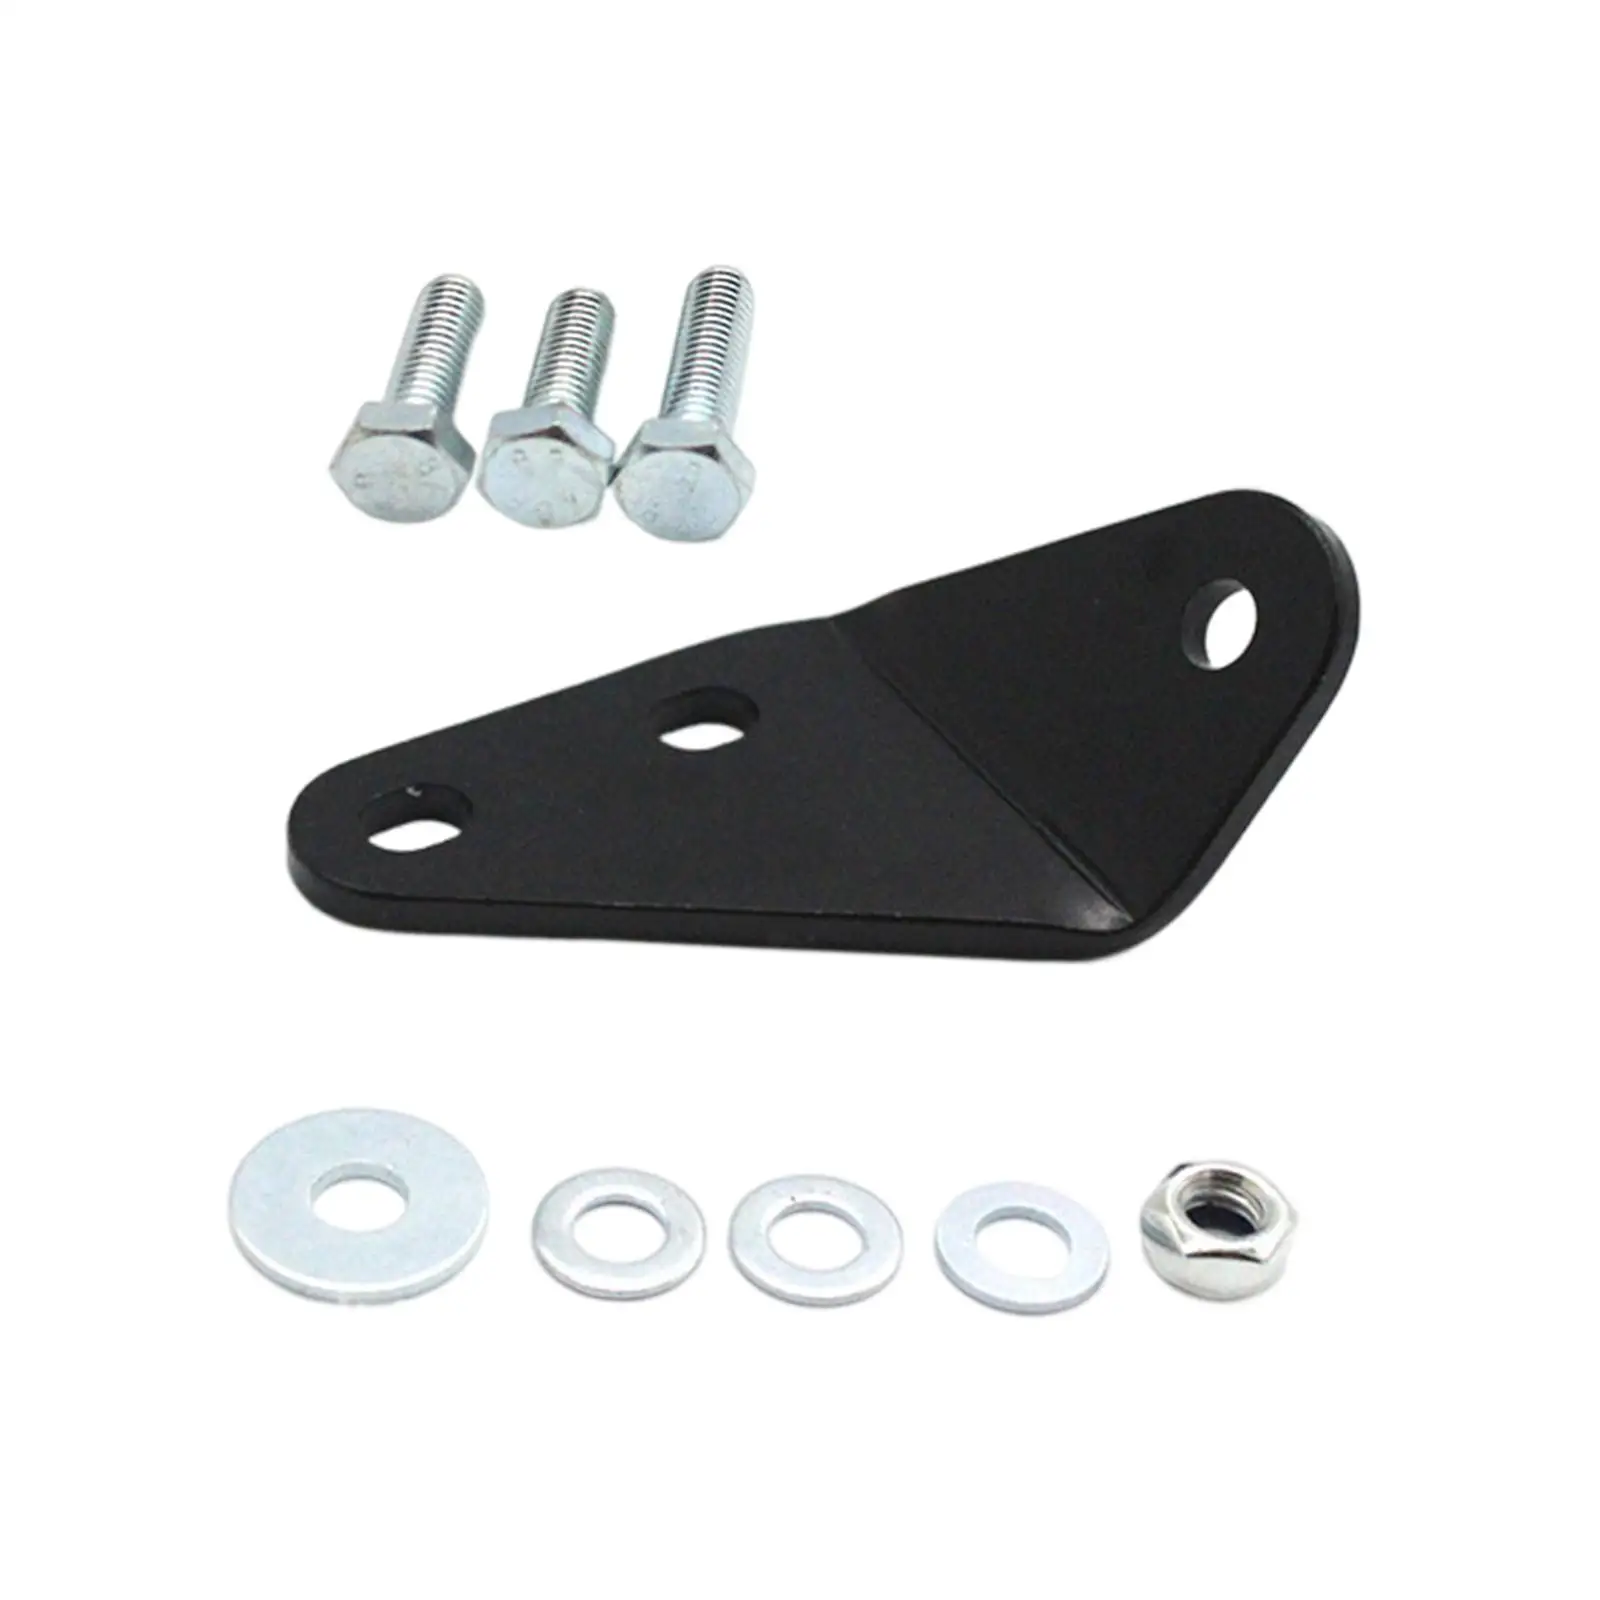 Clutch Pedal Repair Bracket Set Replacement Parts for VW T4 Transporter